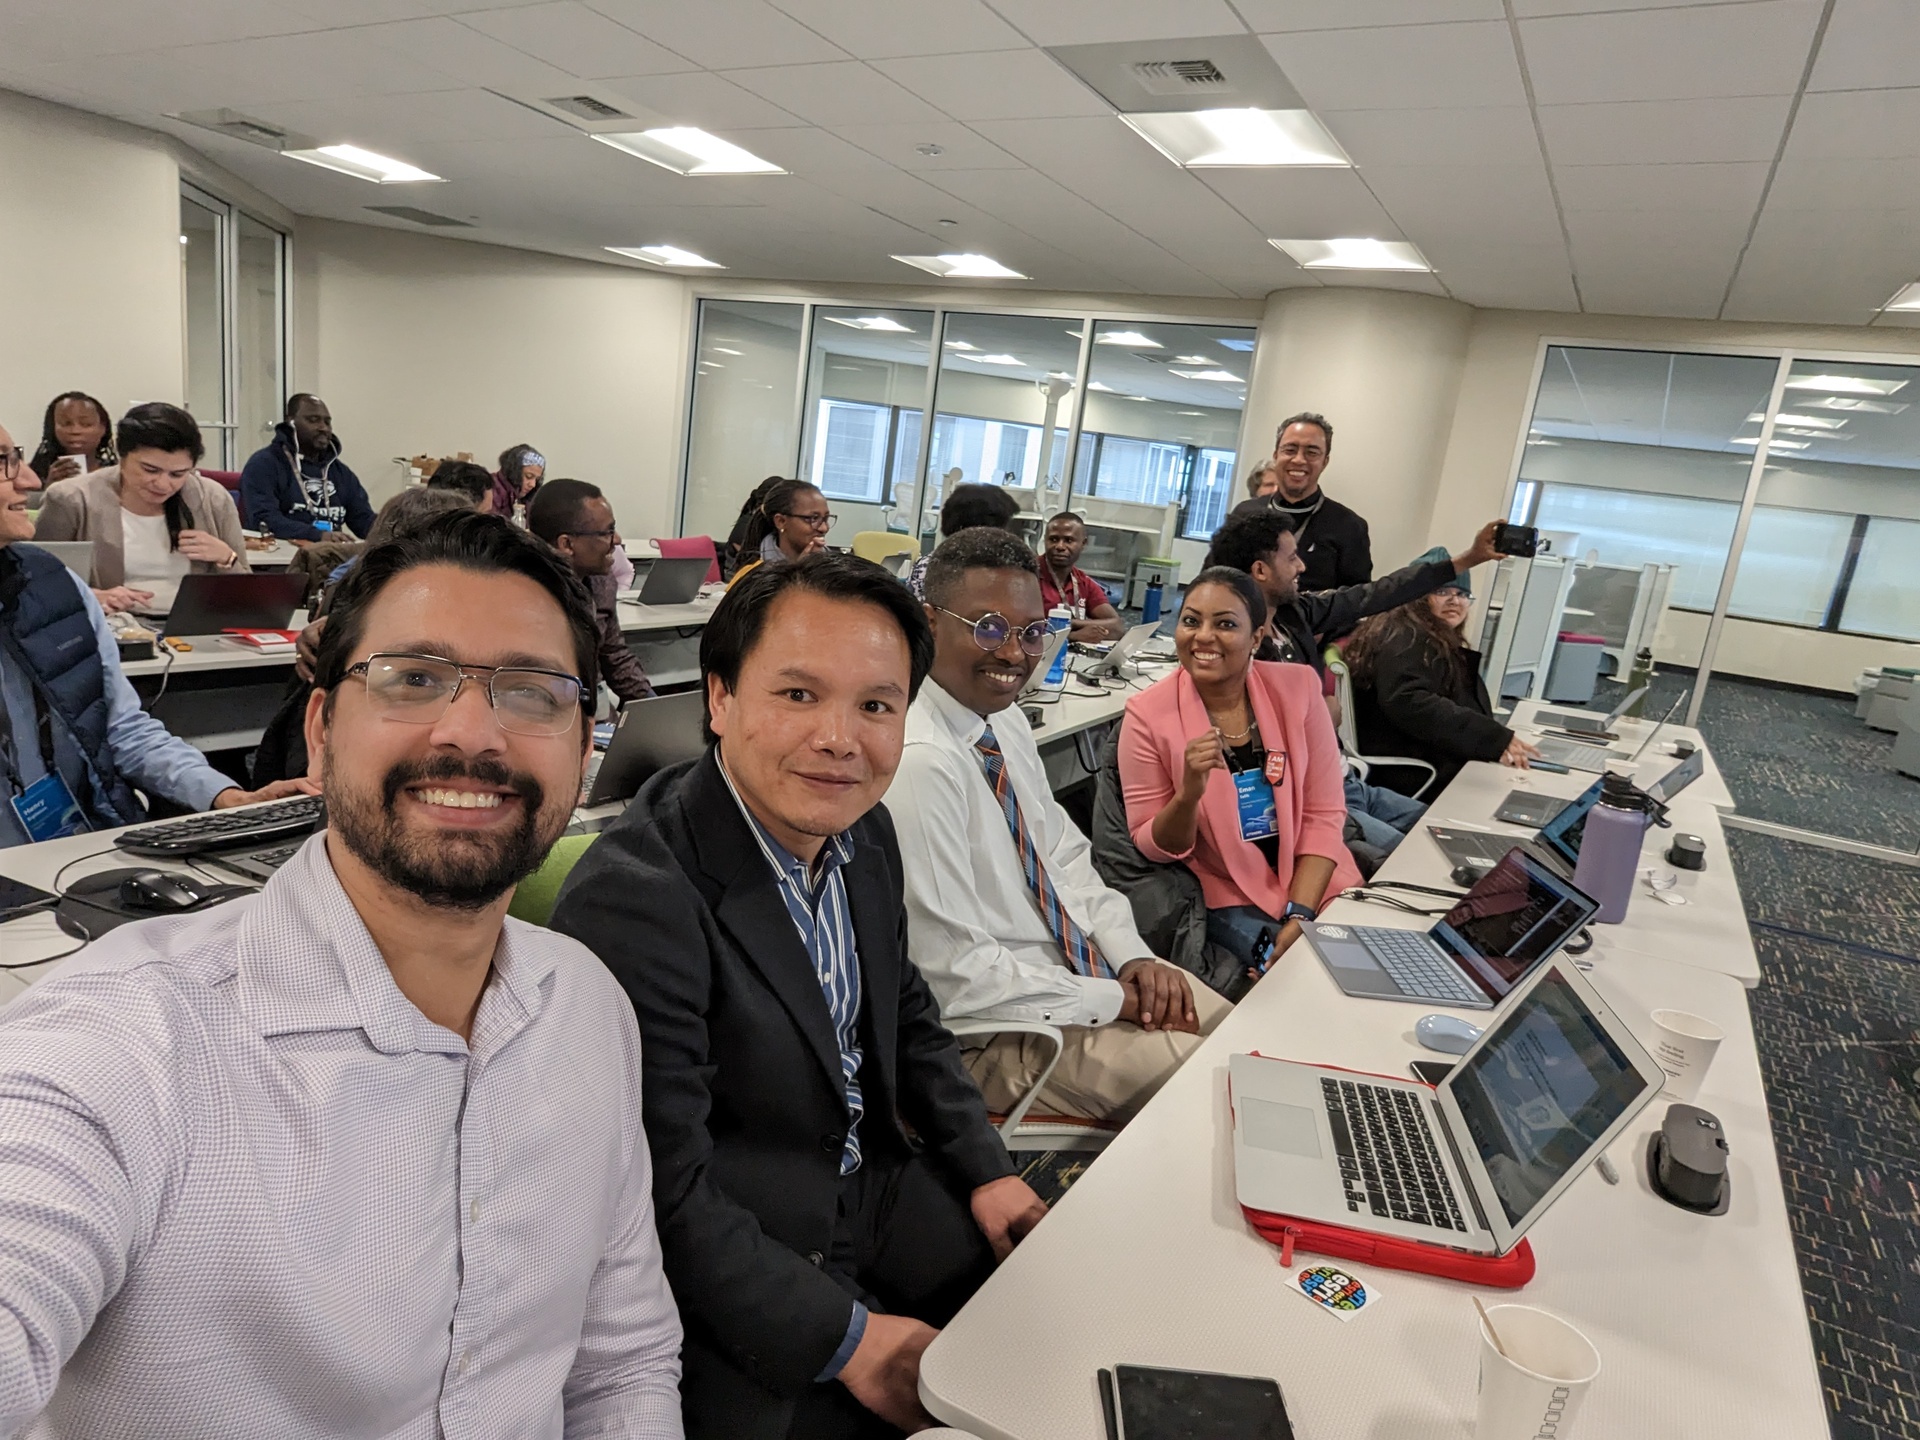 Monzur Morshed Patwary, taking the picture, with other fellows in his cohort attending training in Washington D.C., as part of the fellowship. Fellows are sitting at rows of longs desks with computers and an instructor walks around checking on them.